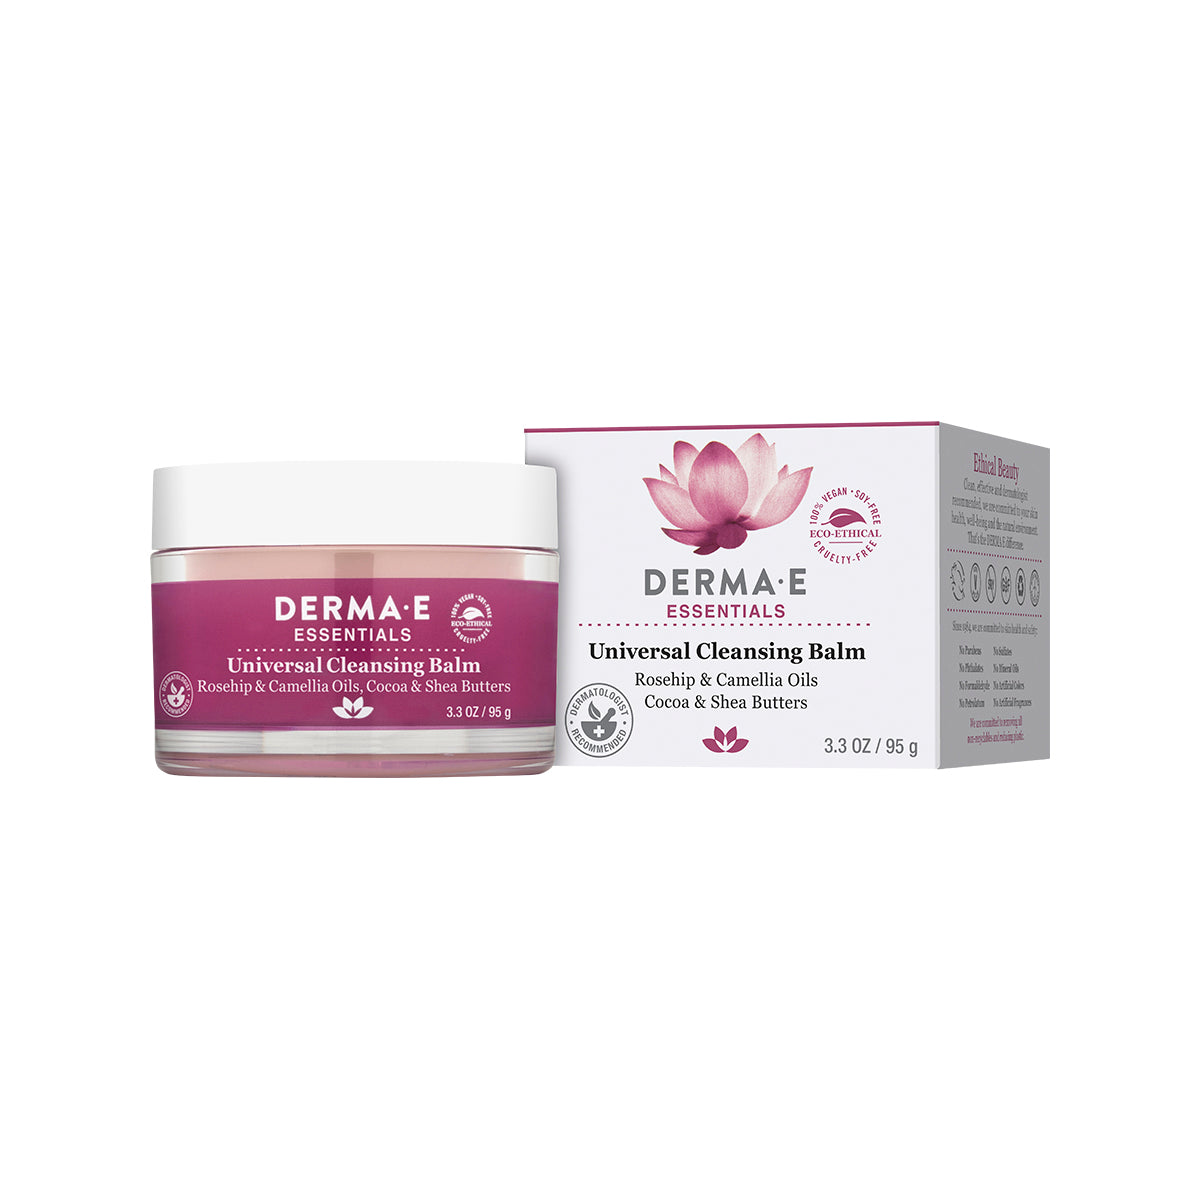 Universal Cleansing Balm |100g| - ProCare Outlet by DERMA E